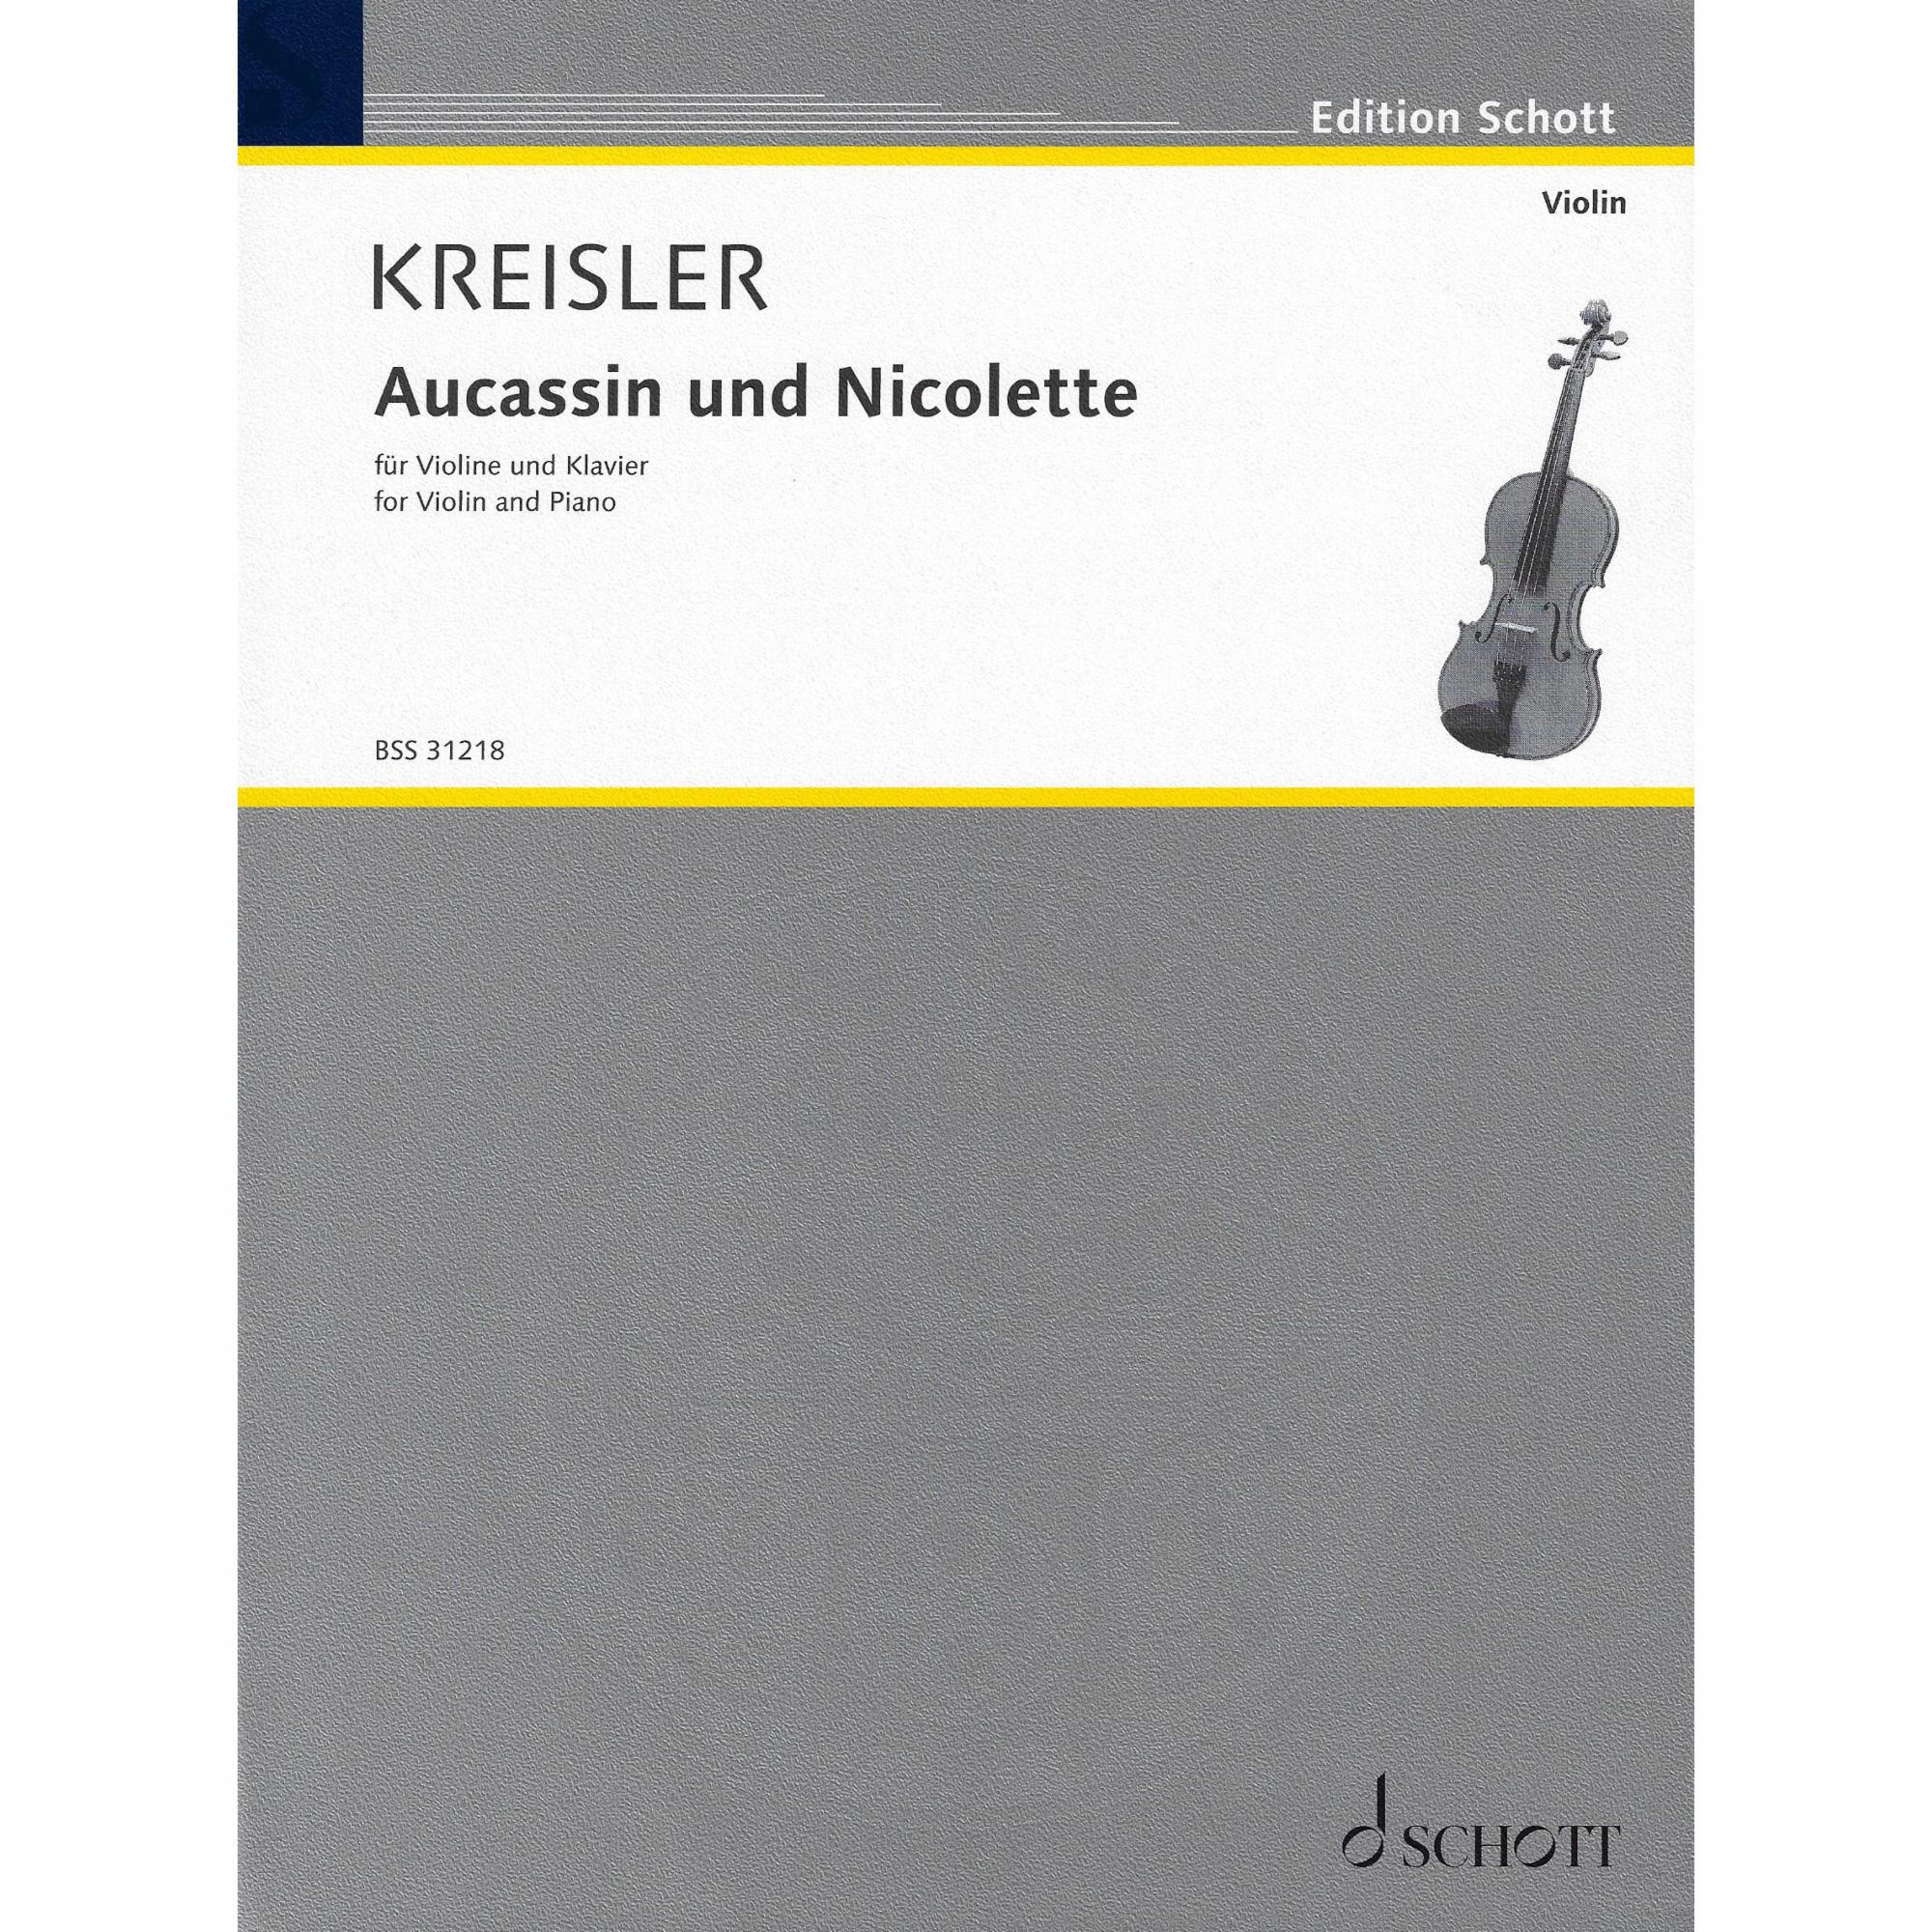 Kreisler -- Aucassin and Nicolette for Violin and Piano